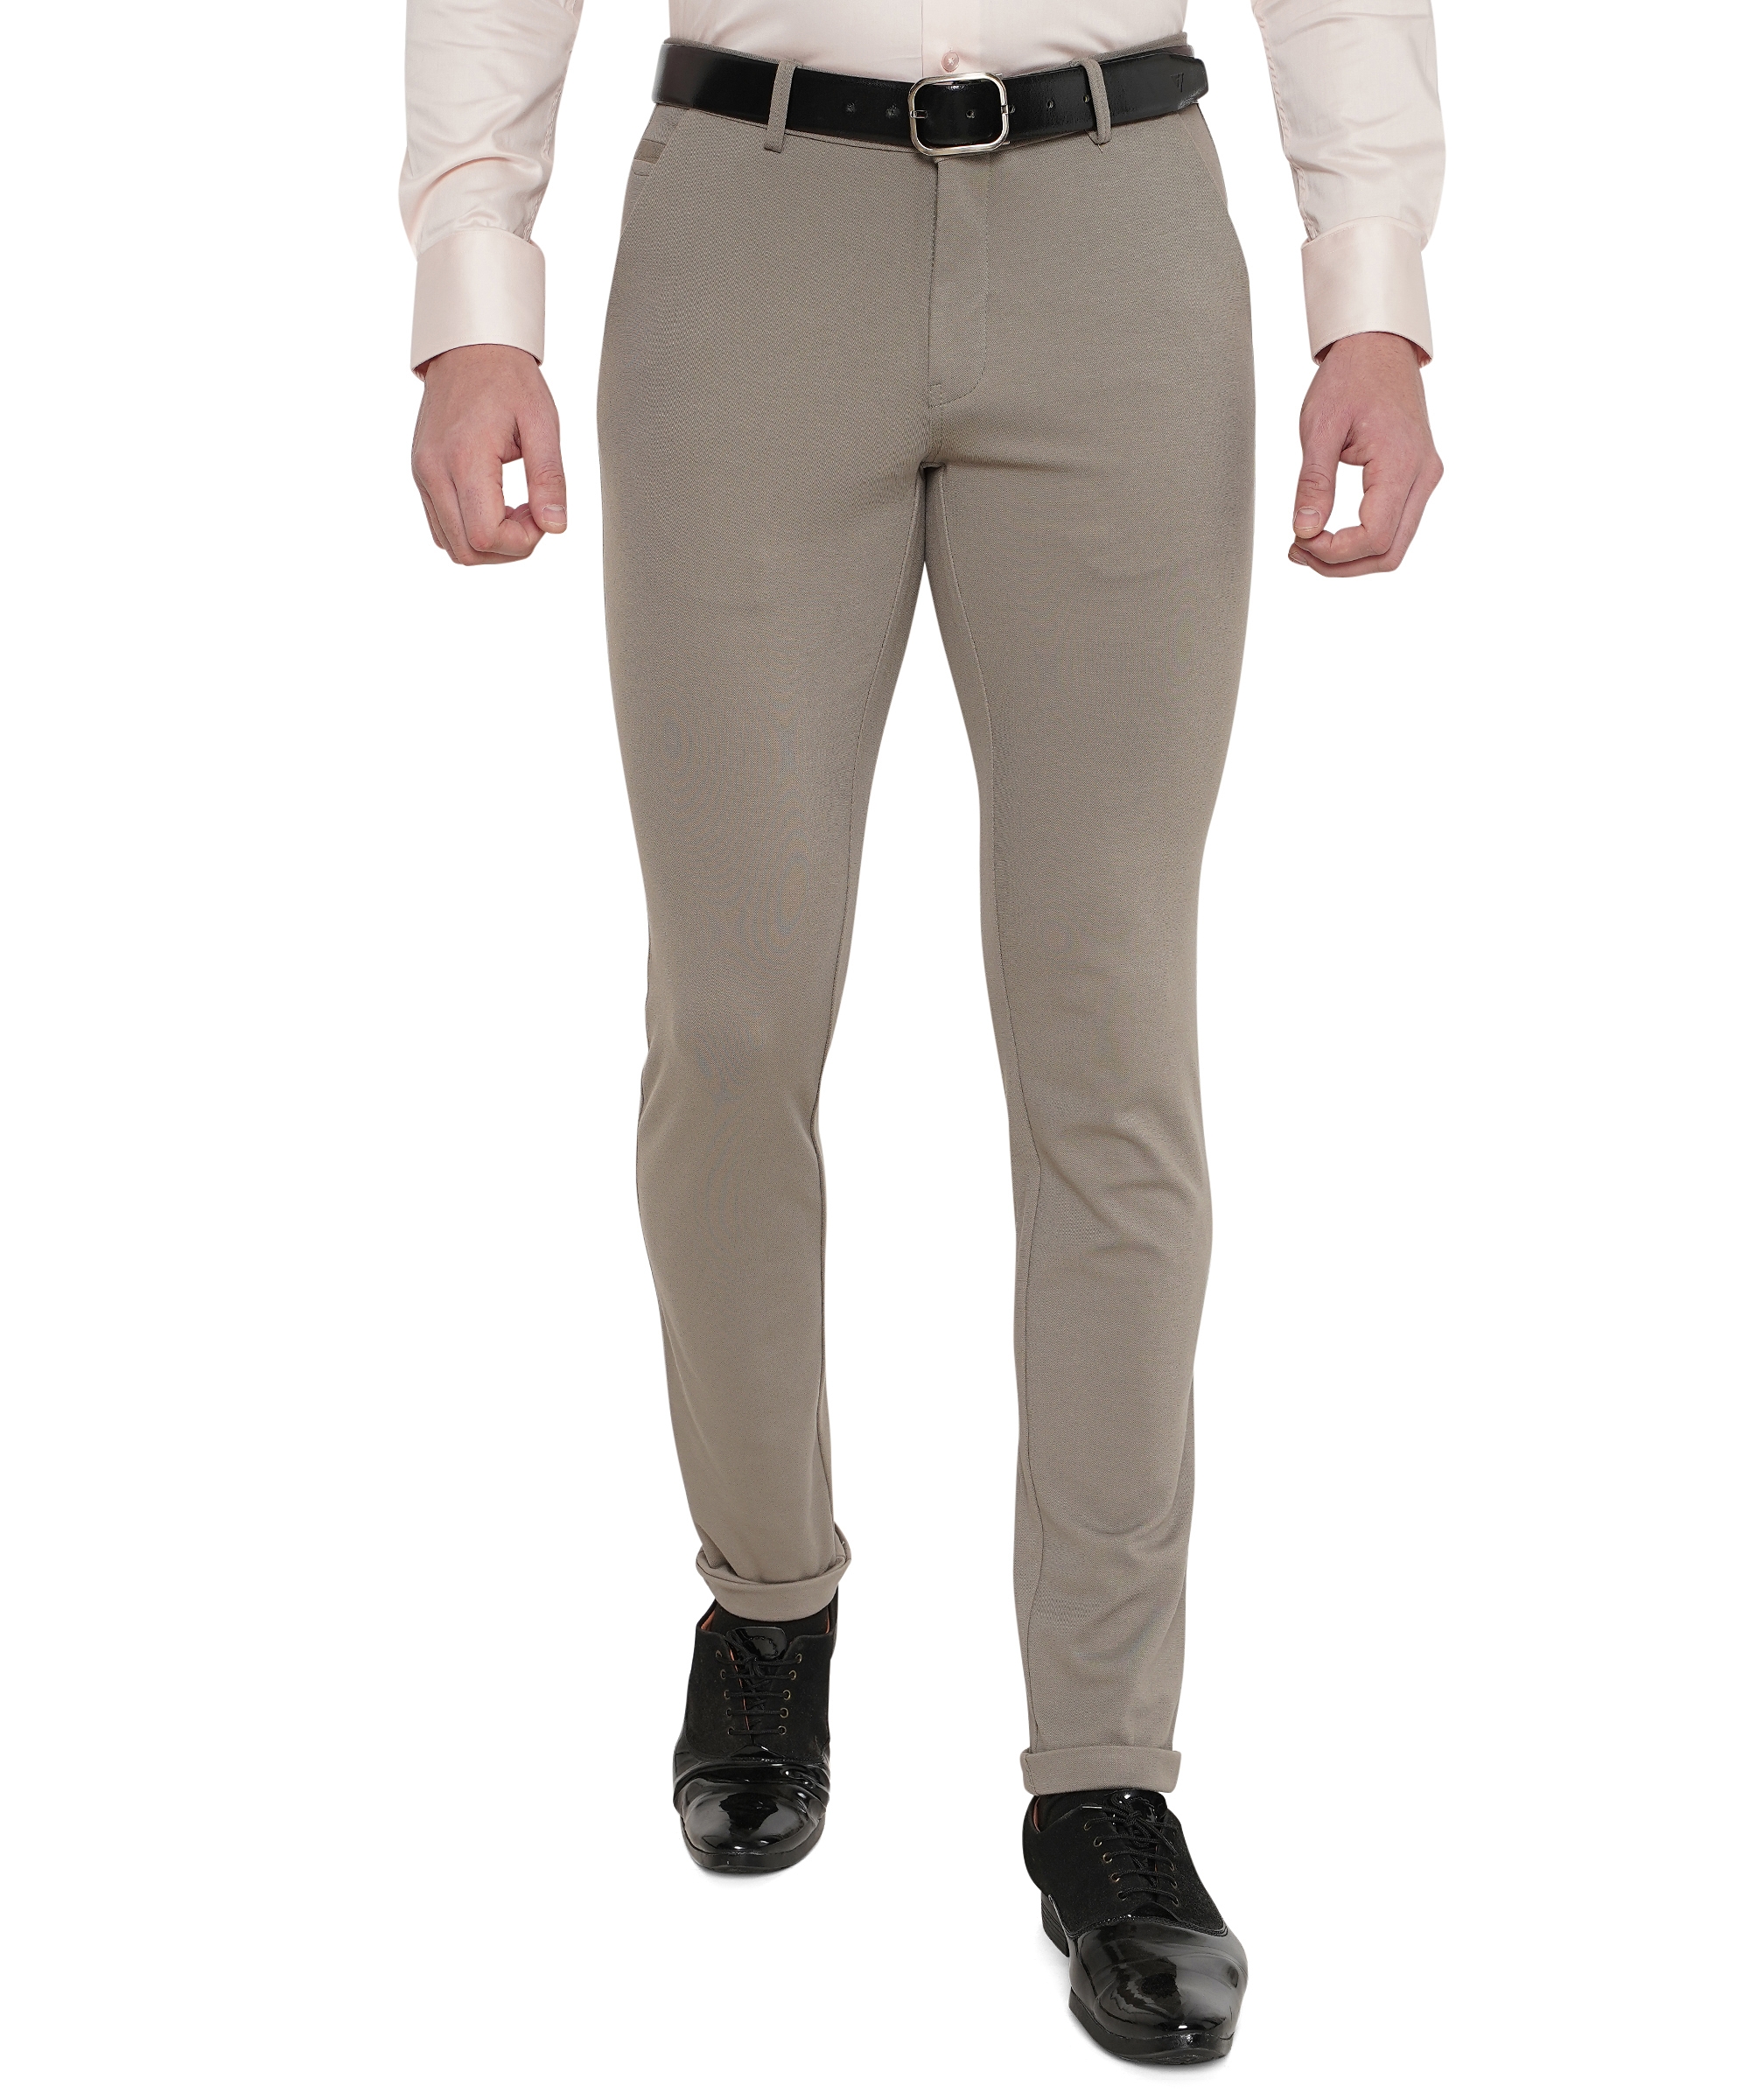 Mens Slim Fit Formal Trousers Fashionable Solid Color Belt Design For  Business, Office, And Social Parties From Mvjy, $29.71 | DHgate.Com